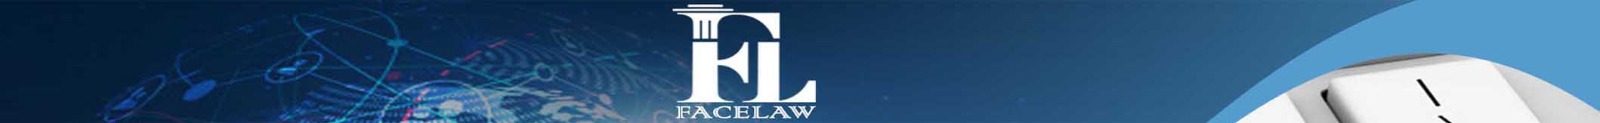 list of lawyers in usa